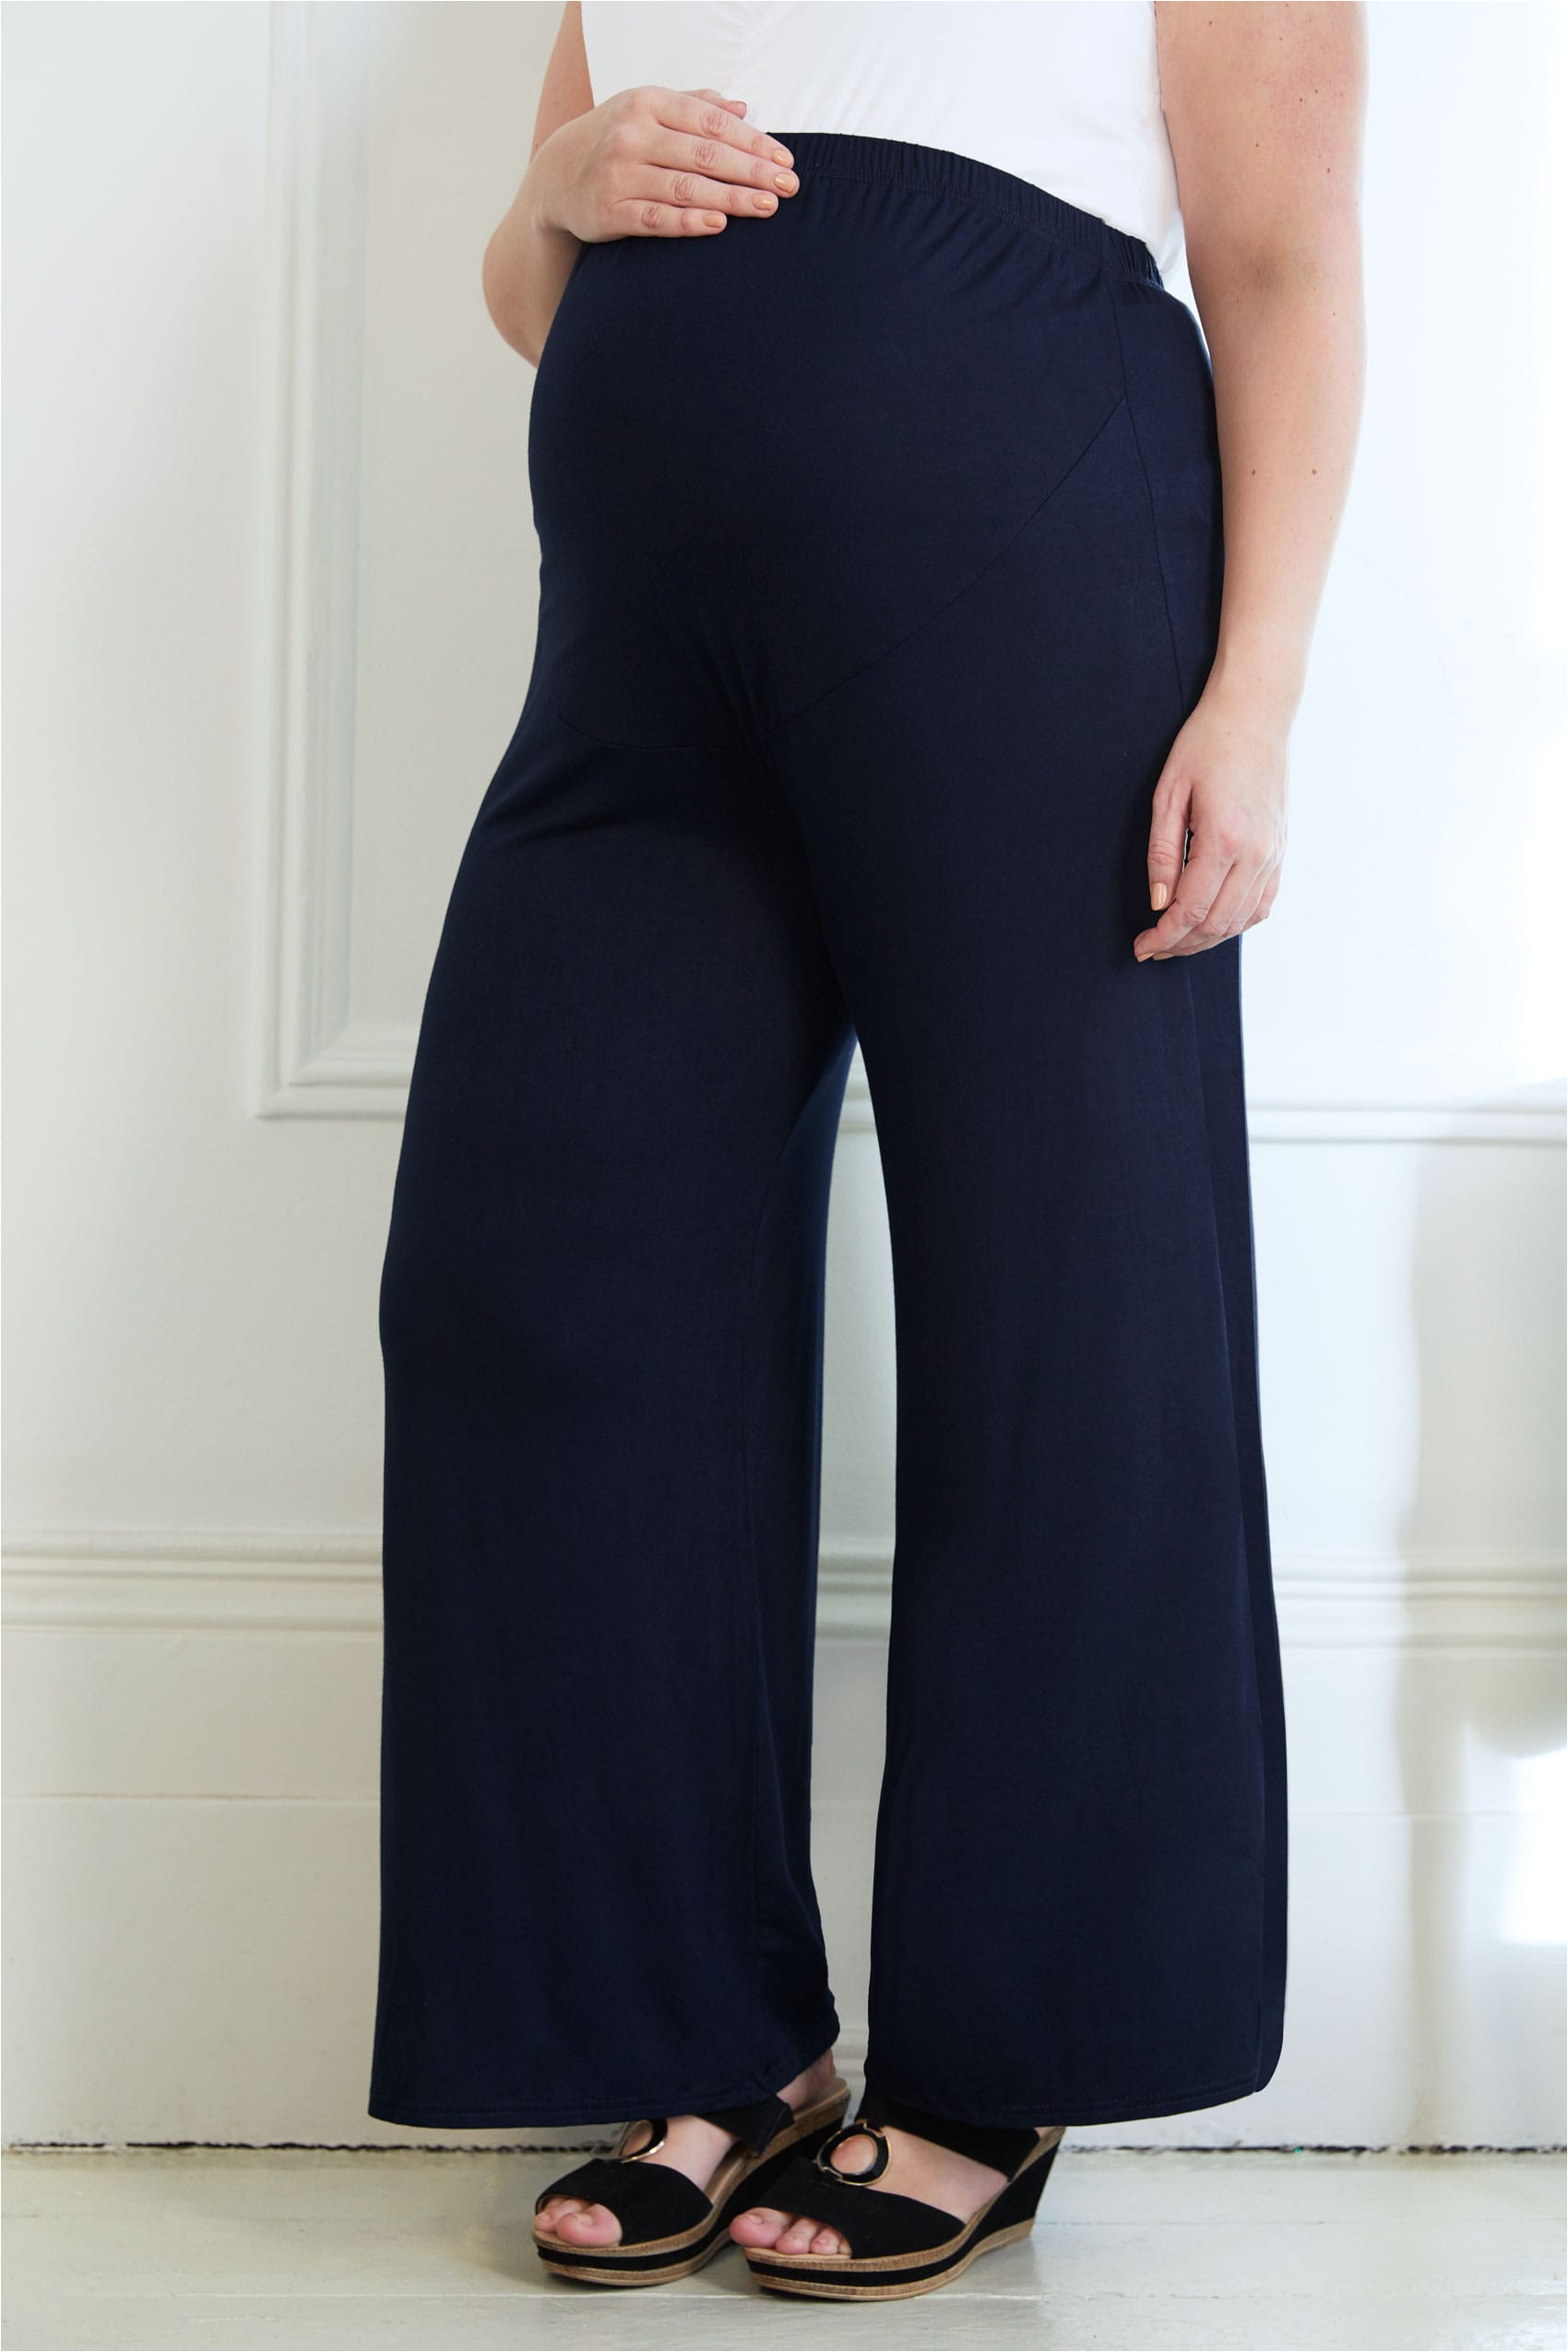 bump it up maternity navy palazzo trousers with support panel p